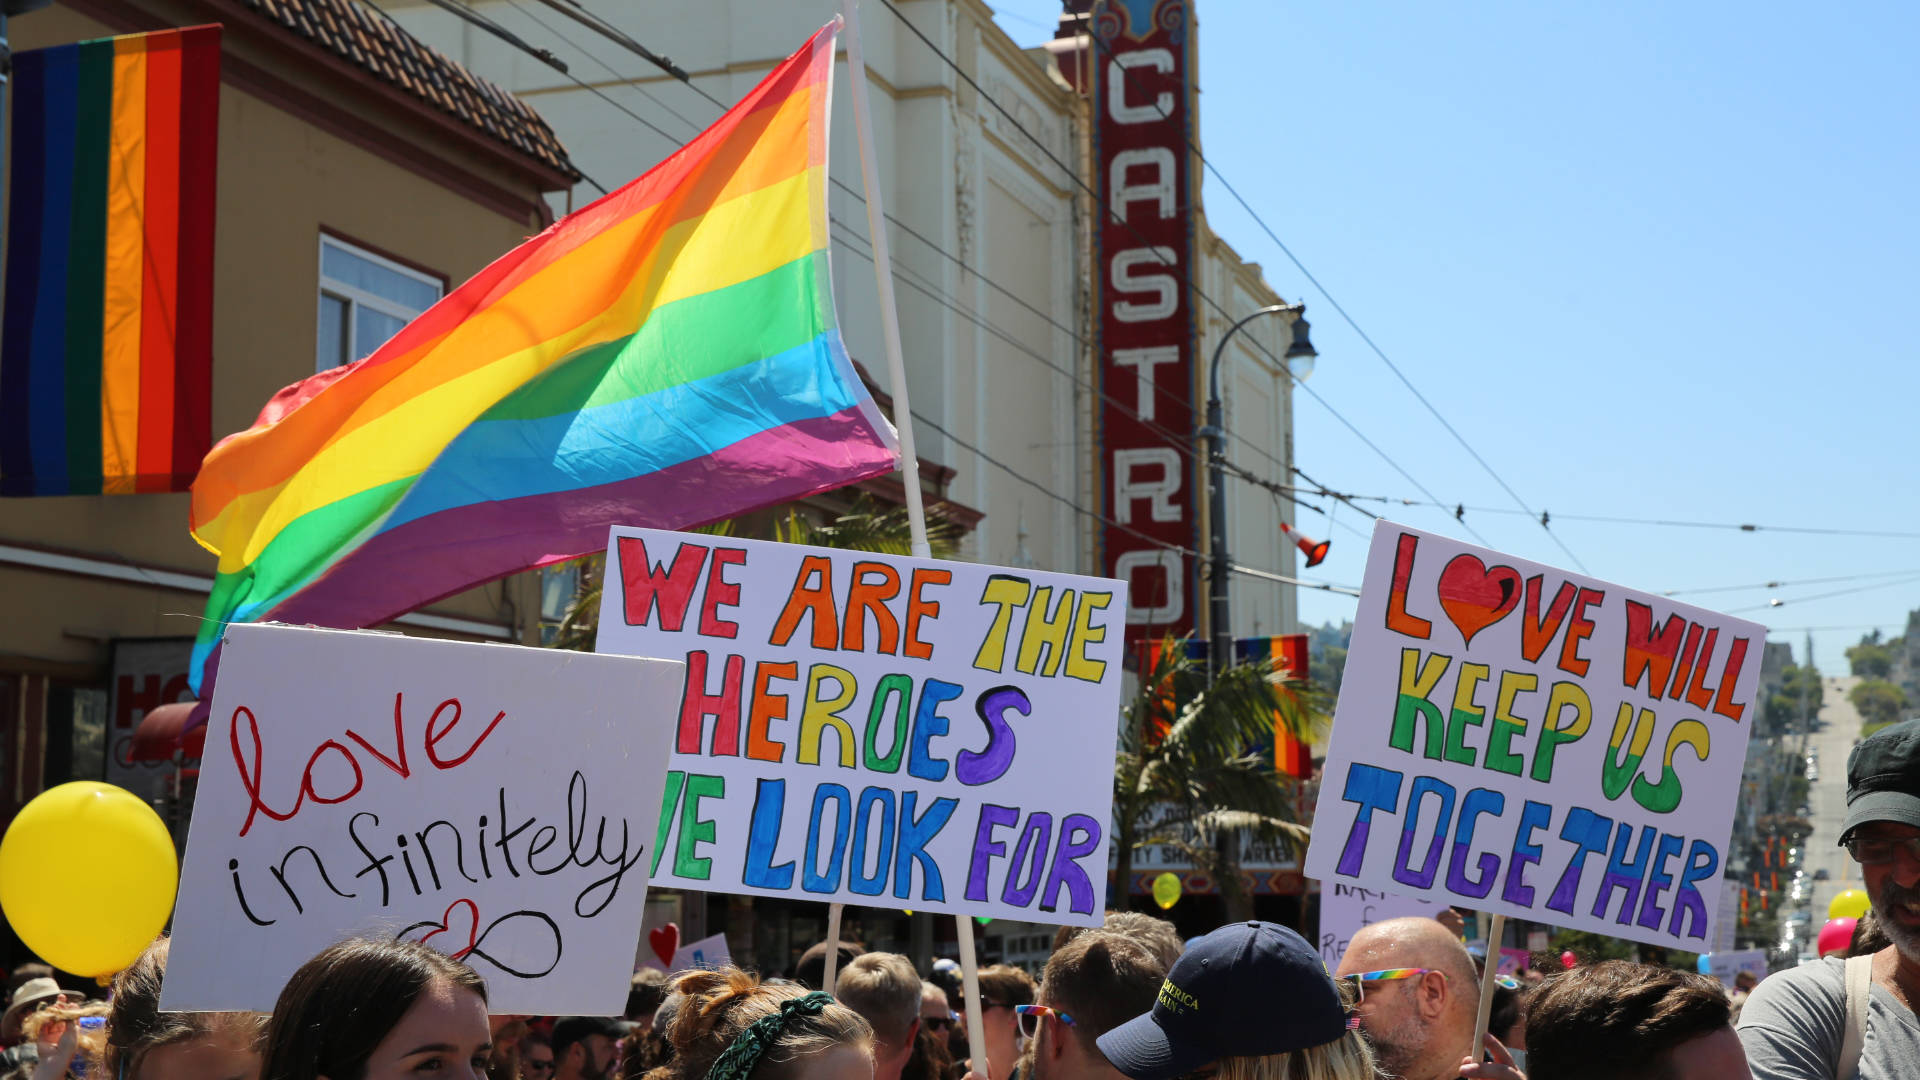 Signs at the Come Together rally in San Francisco's Castro District